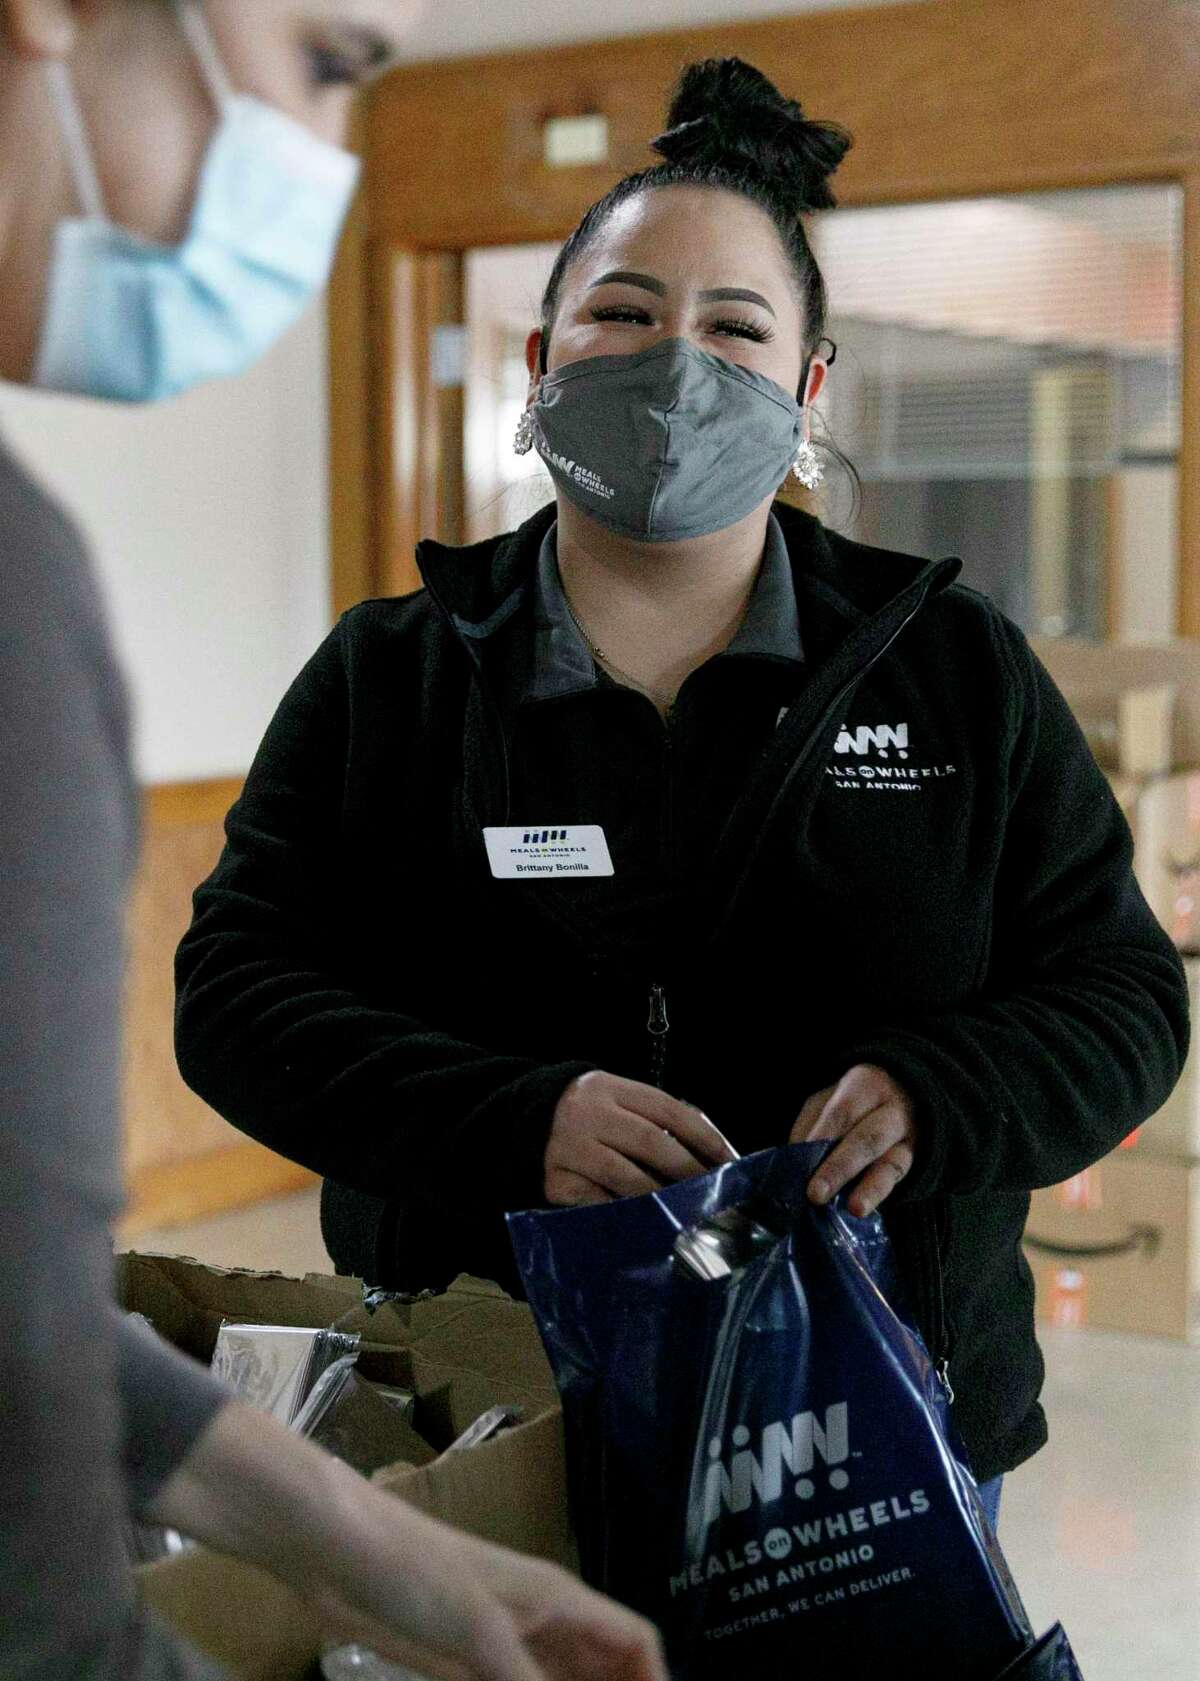 Meals on Wheels employee Brittany Bonilla helps pack up emergency preparedness winter storm kits, which will include emergency blankets and hand warmers, on Friday, Jan. 21, 2022.